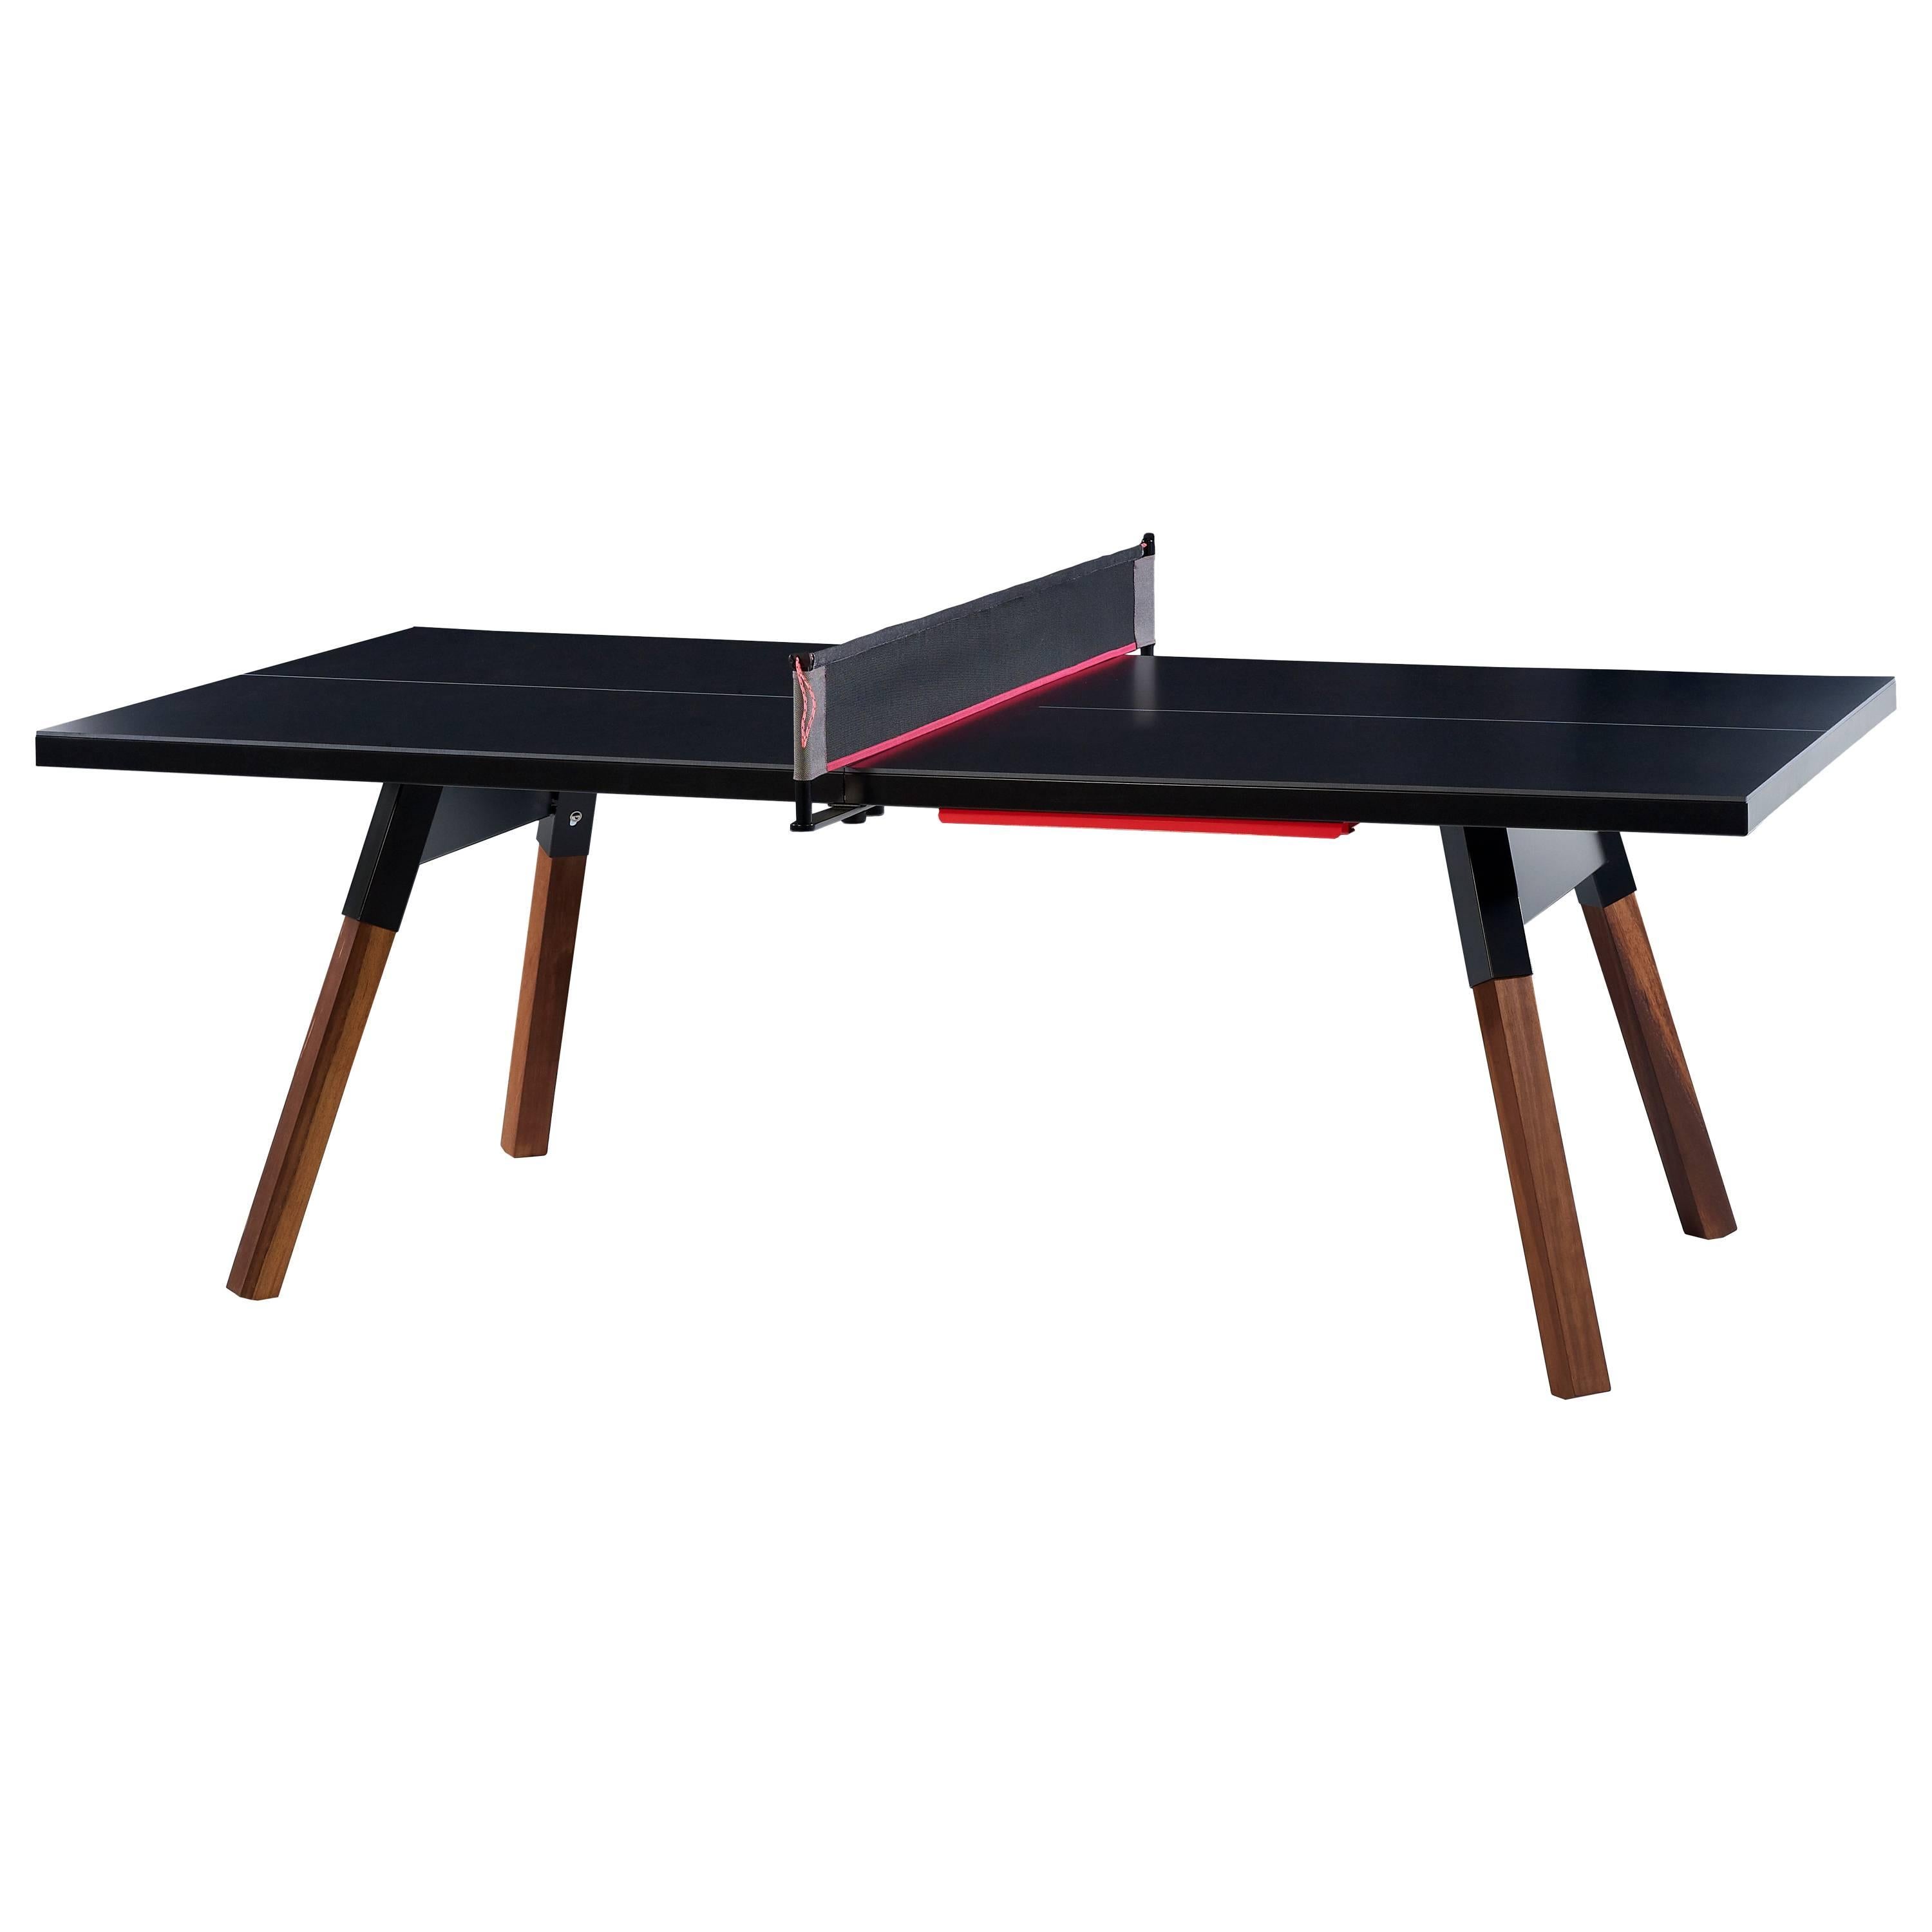 You & Me HPL Top Ping Pong Table 220 in Black by RS Barcelona For Sale